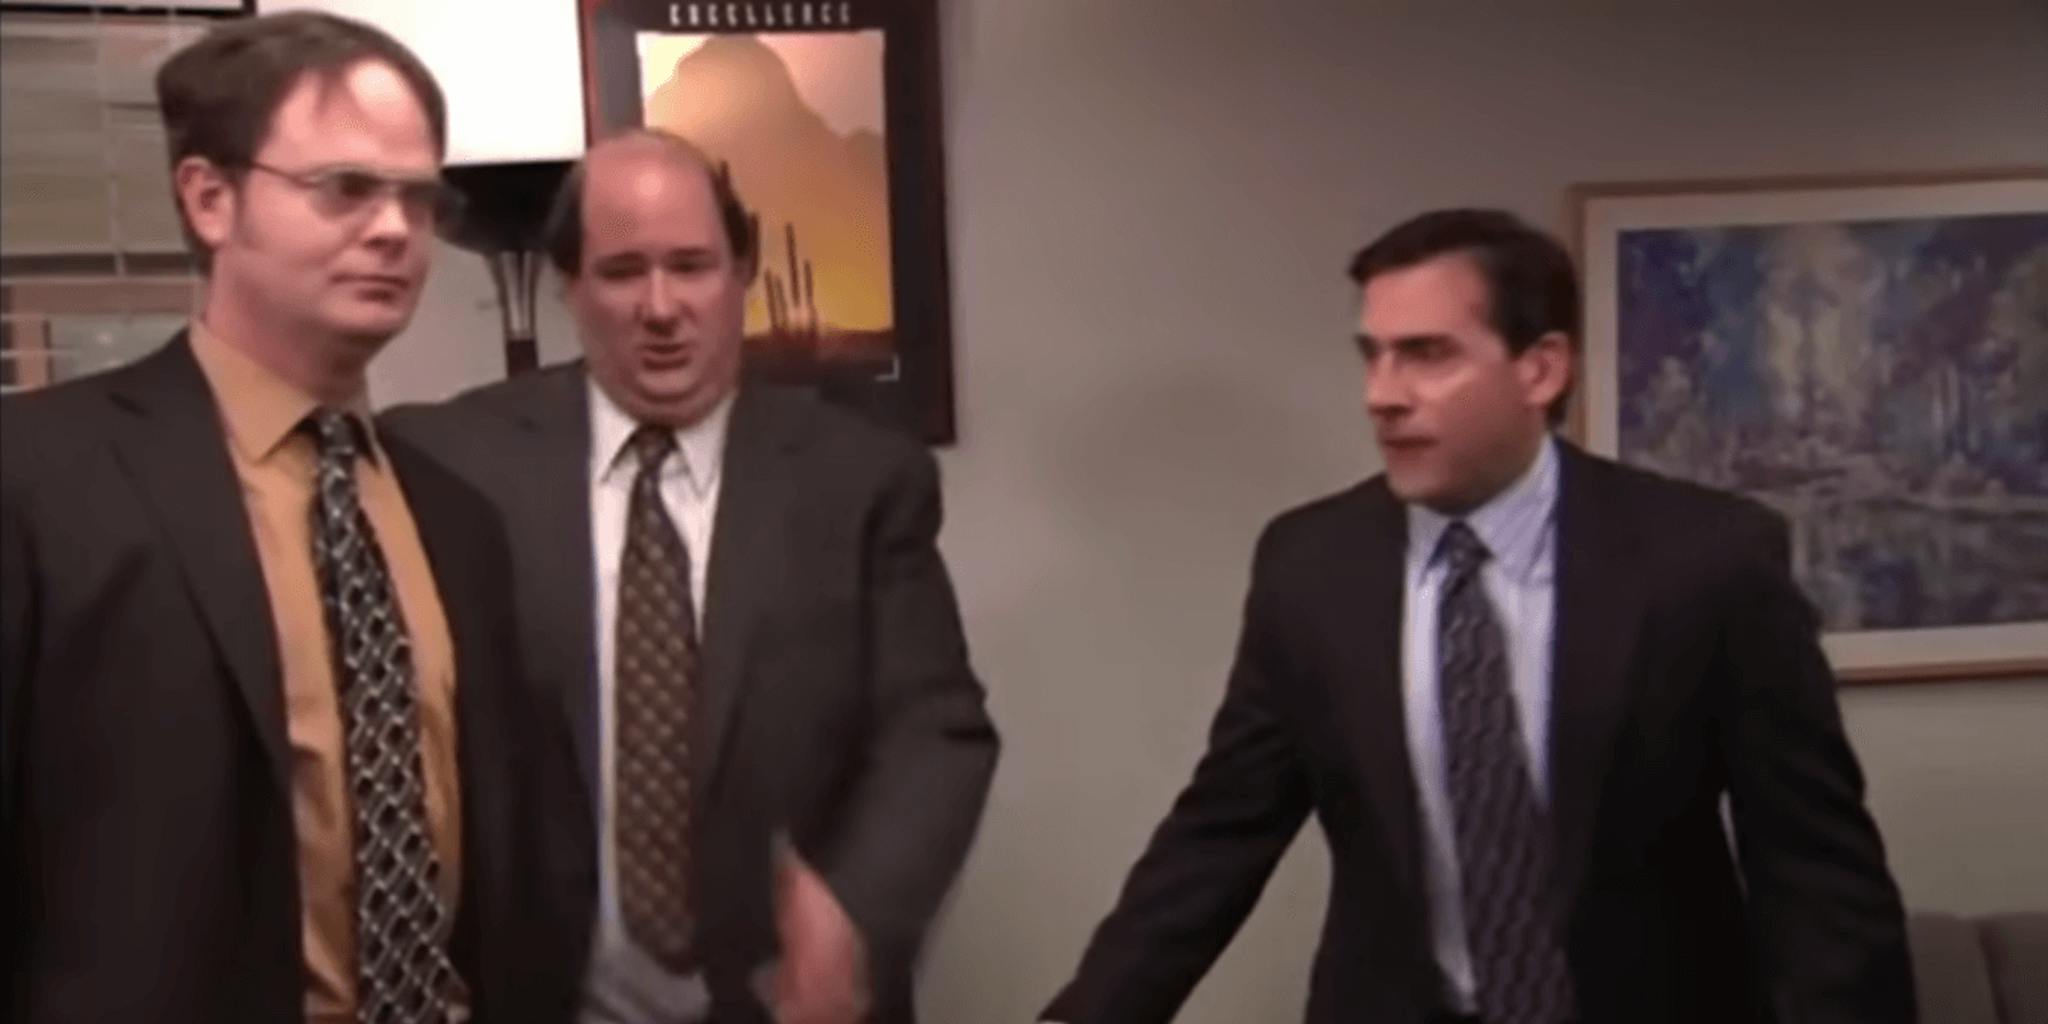 Where To Watch 'The Office' Online Price guide and more (MAY 2020)